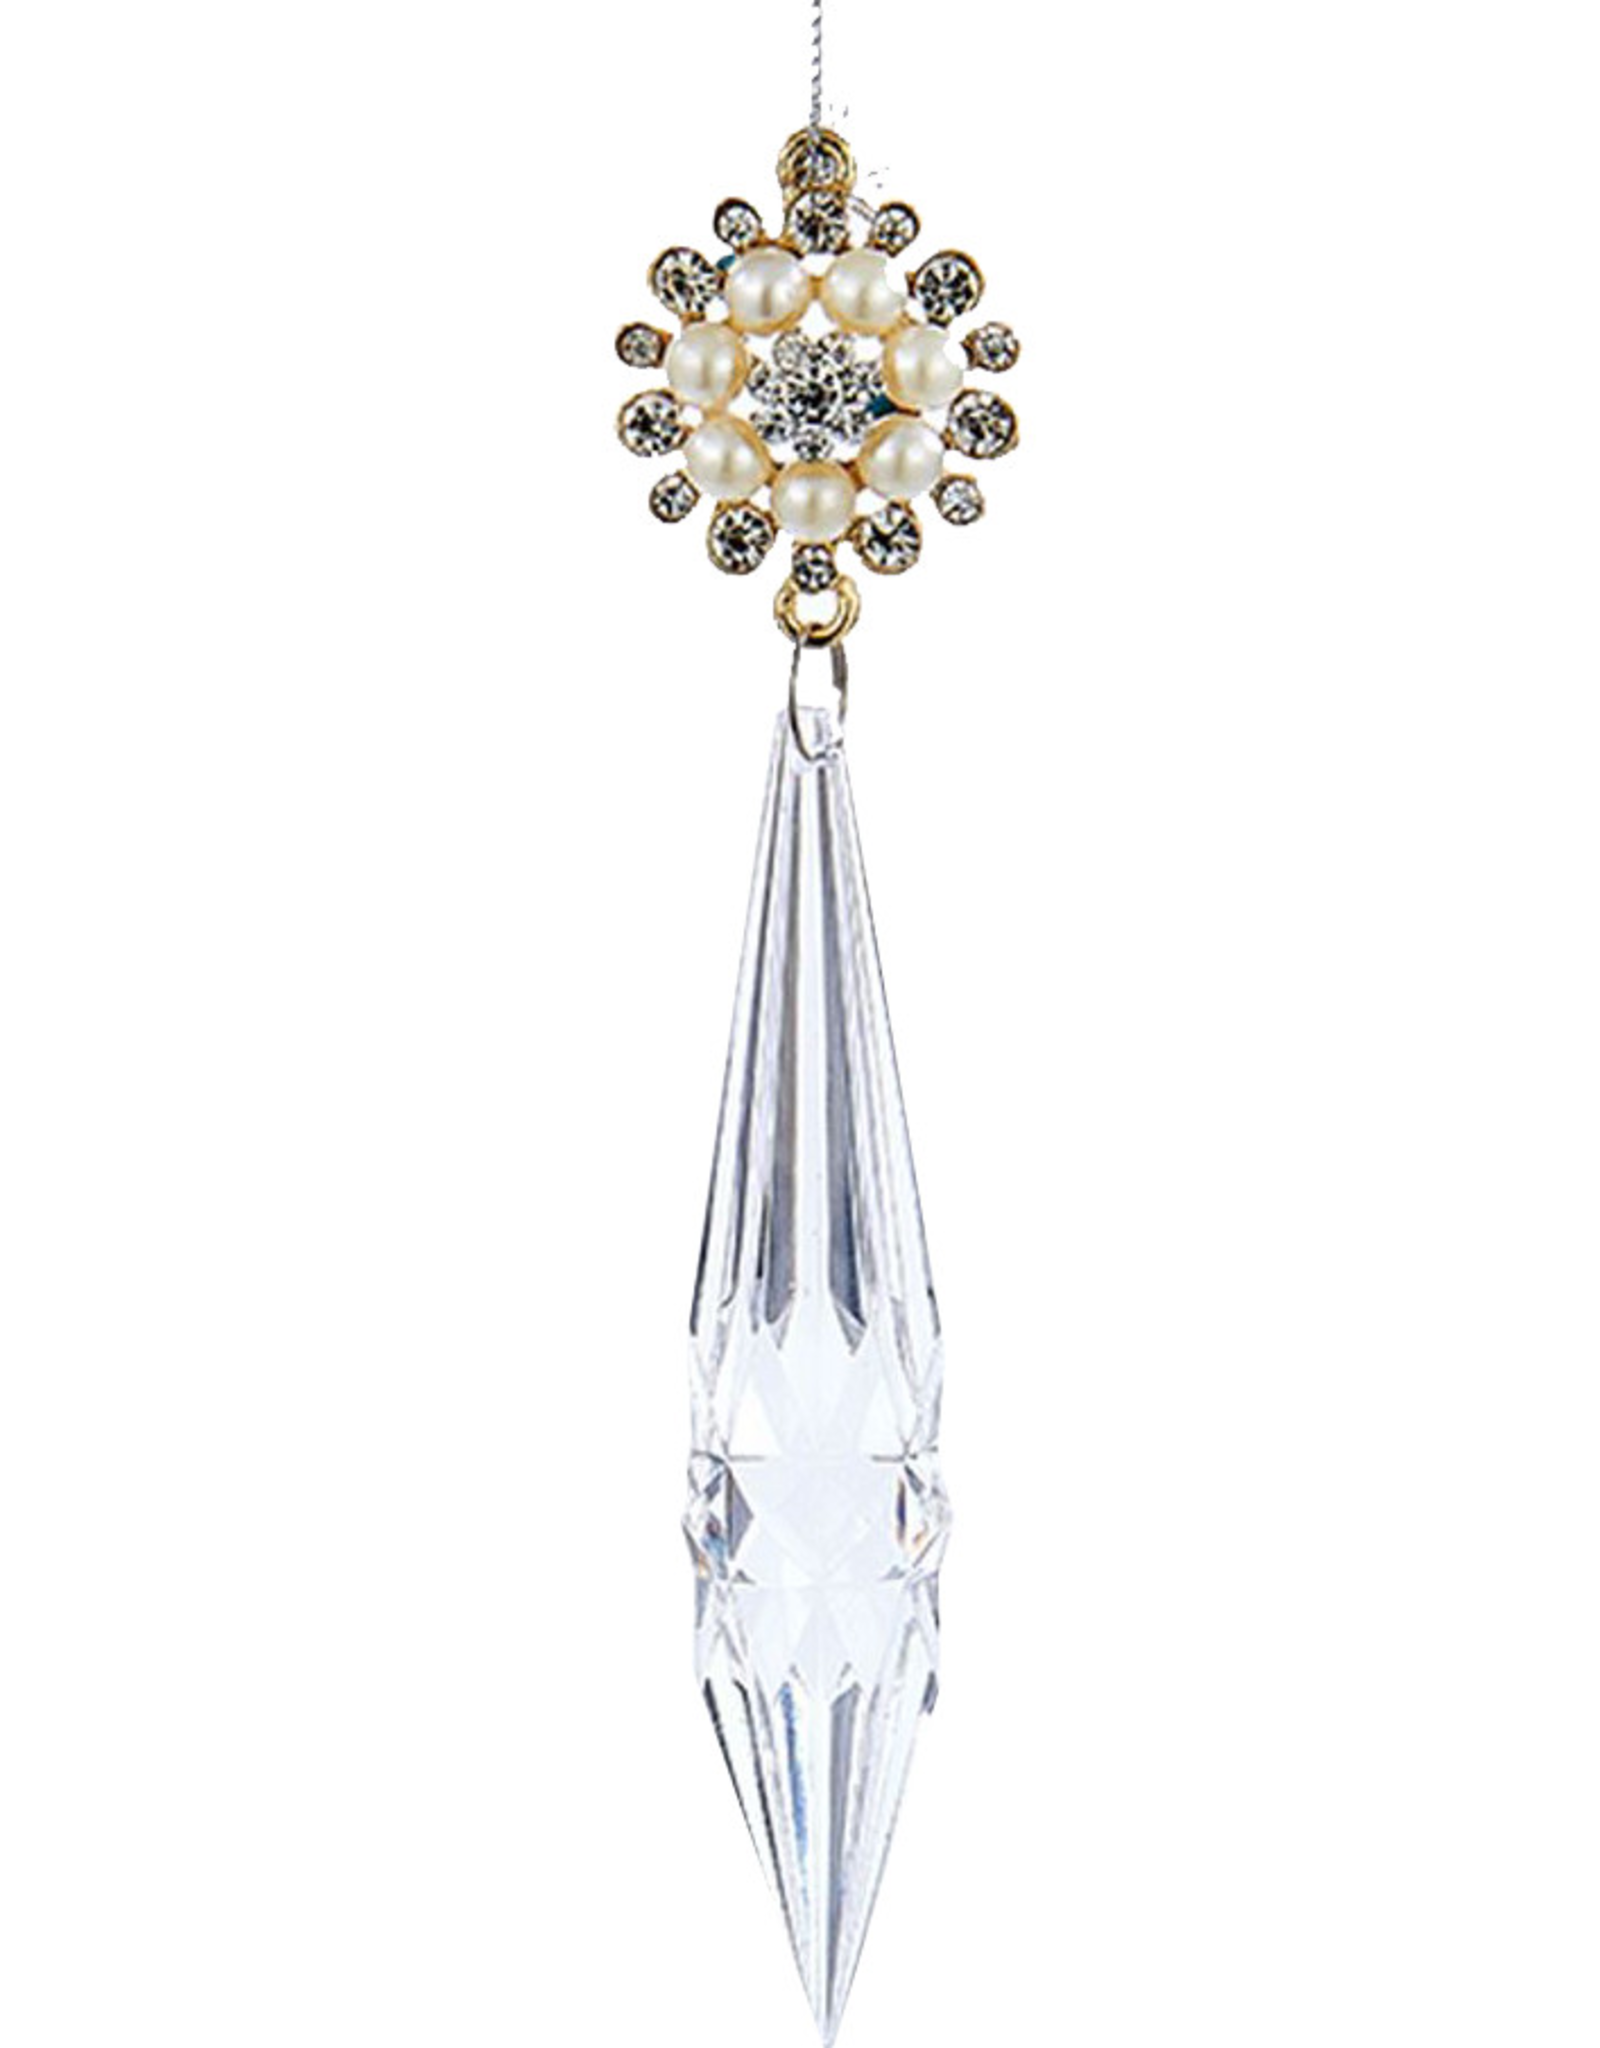 Kurt Adler Icicle Ornament w Jewels and Pearls 5.6 inch -B